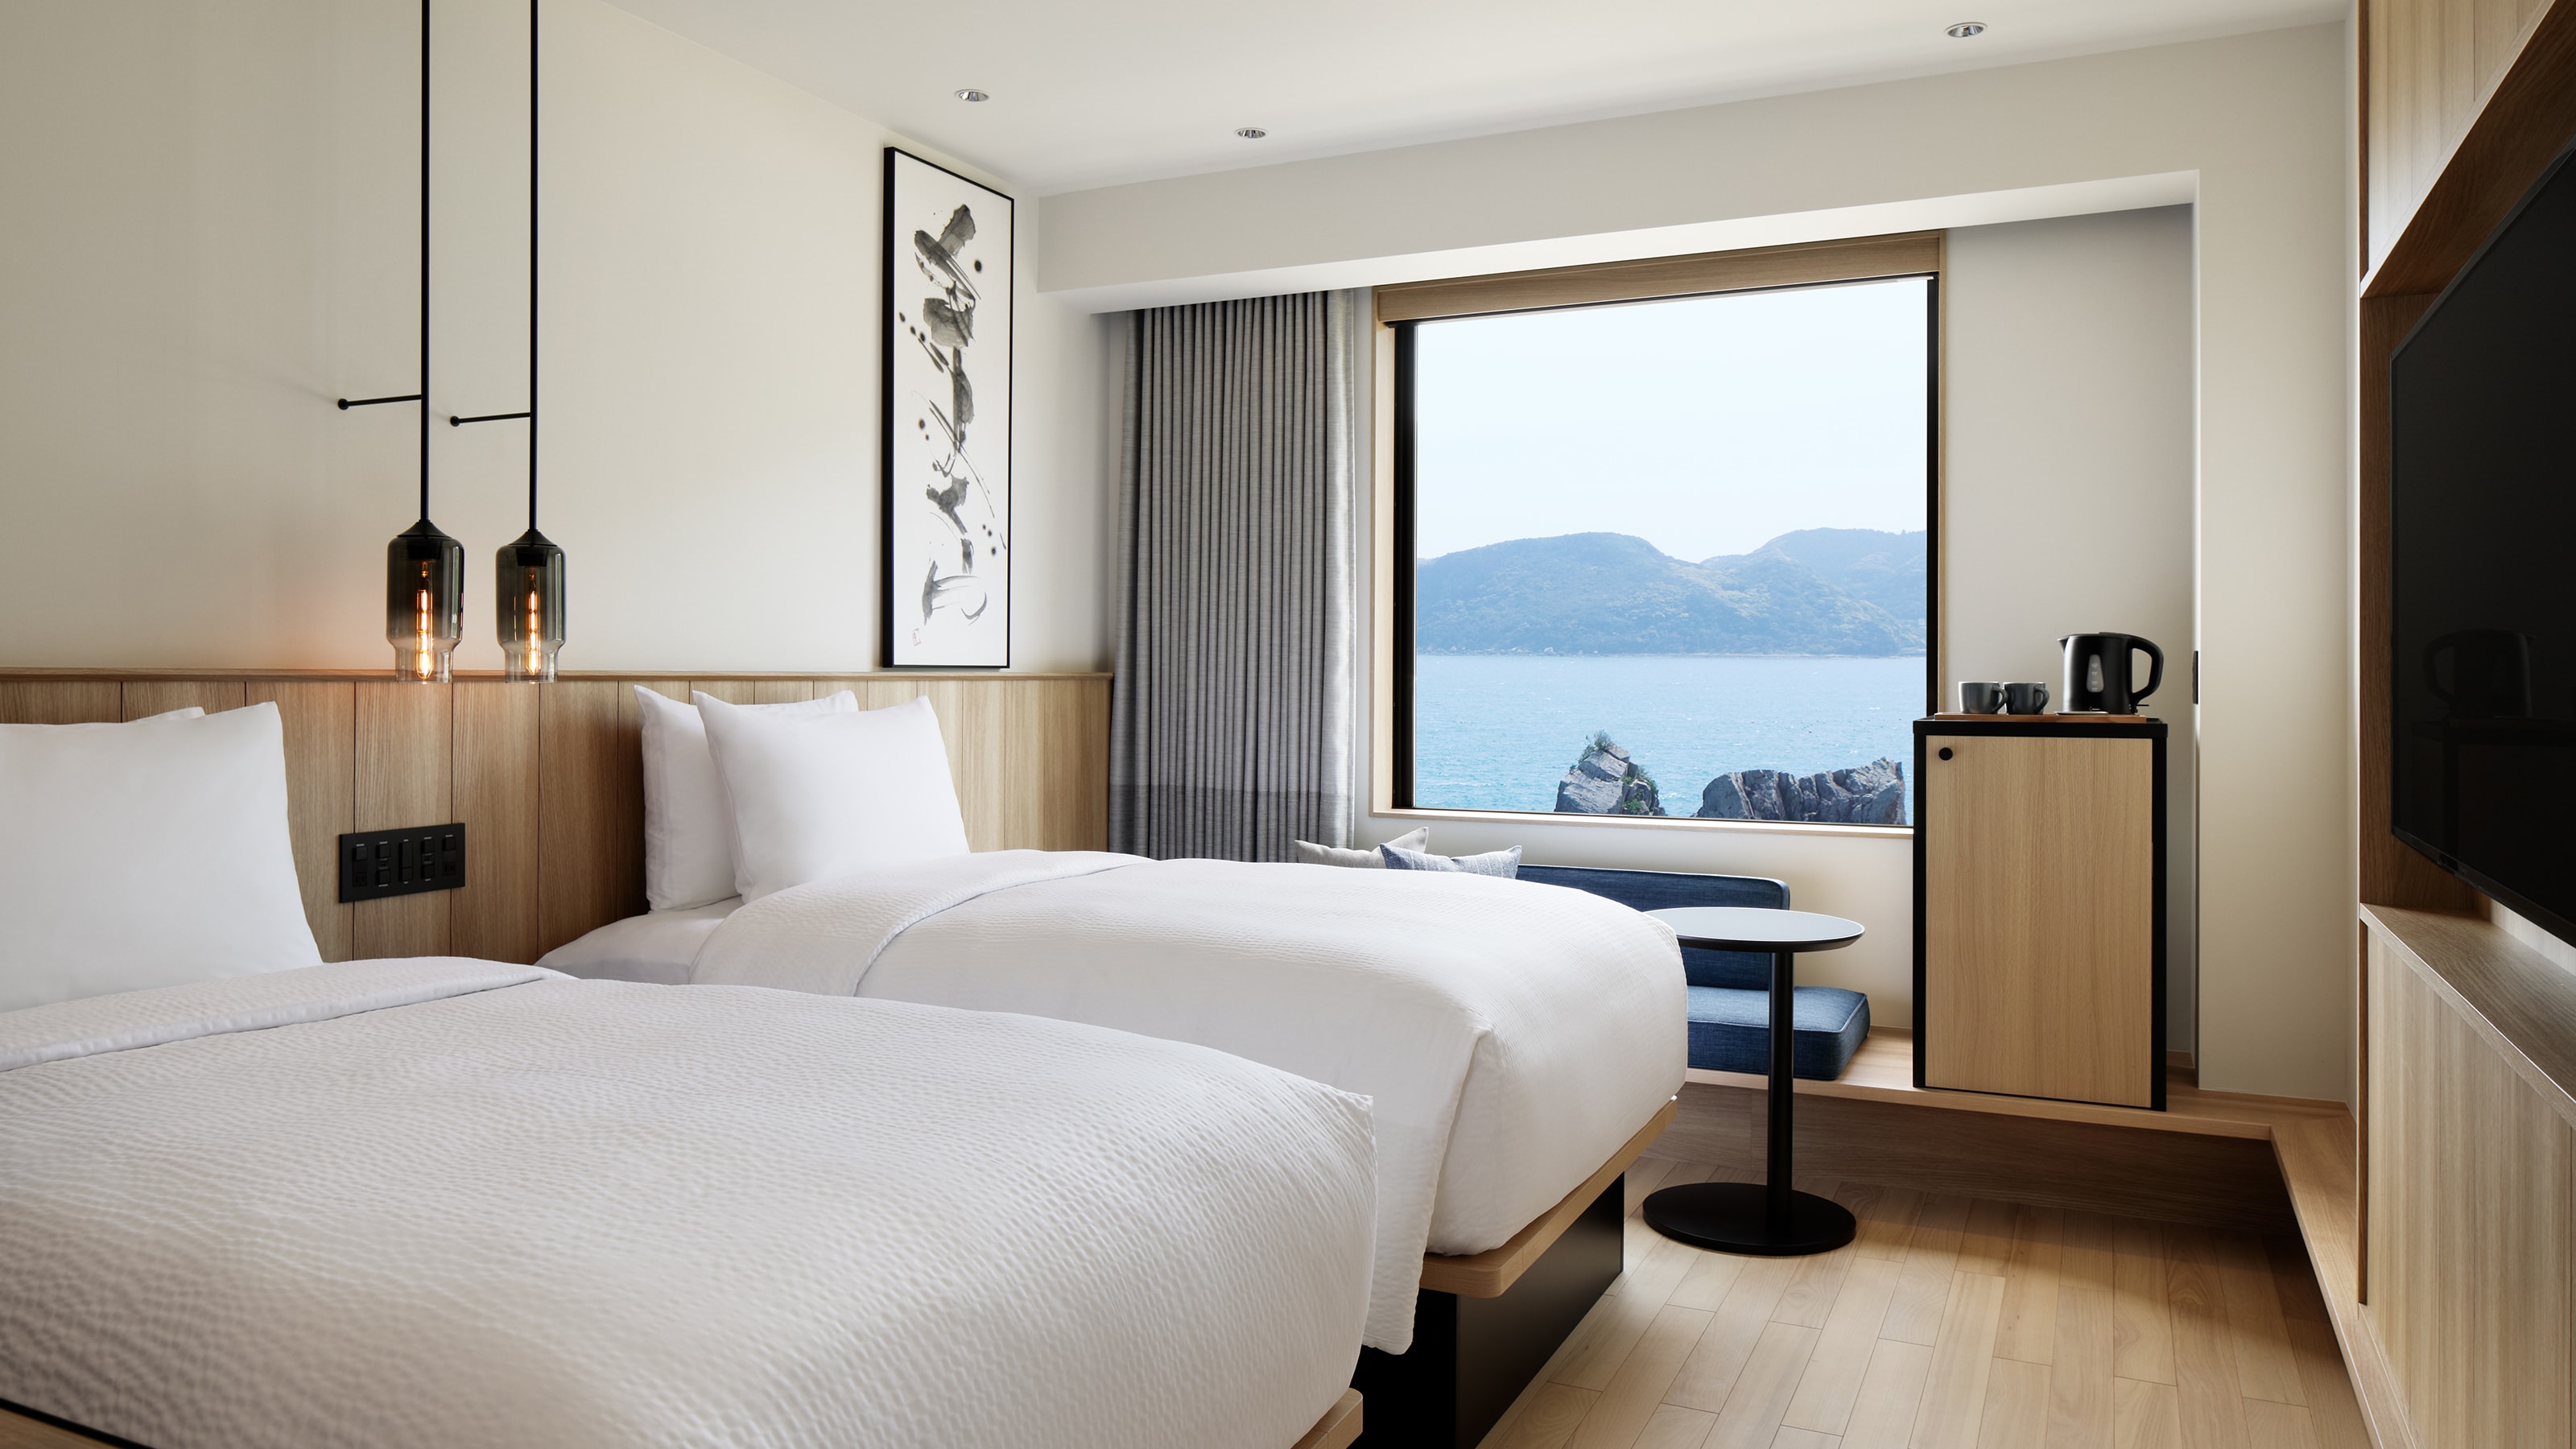 Ocean view twin room: 25 square meters, non-smoking, bed width 120 cm. Enjoy a relaxing moment in a room with a sea view.